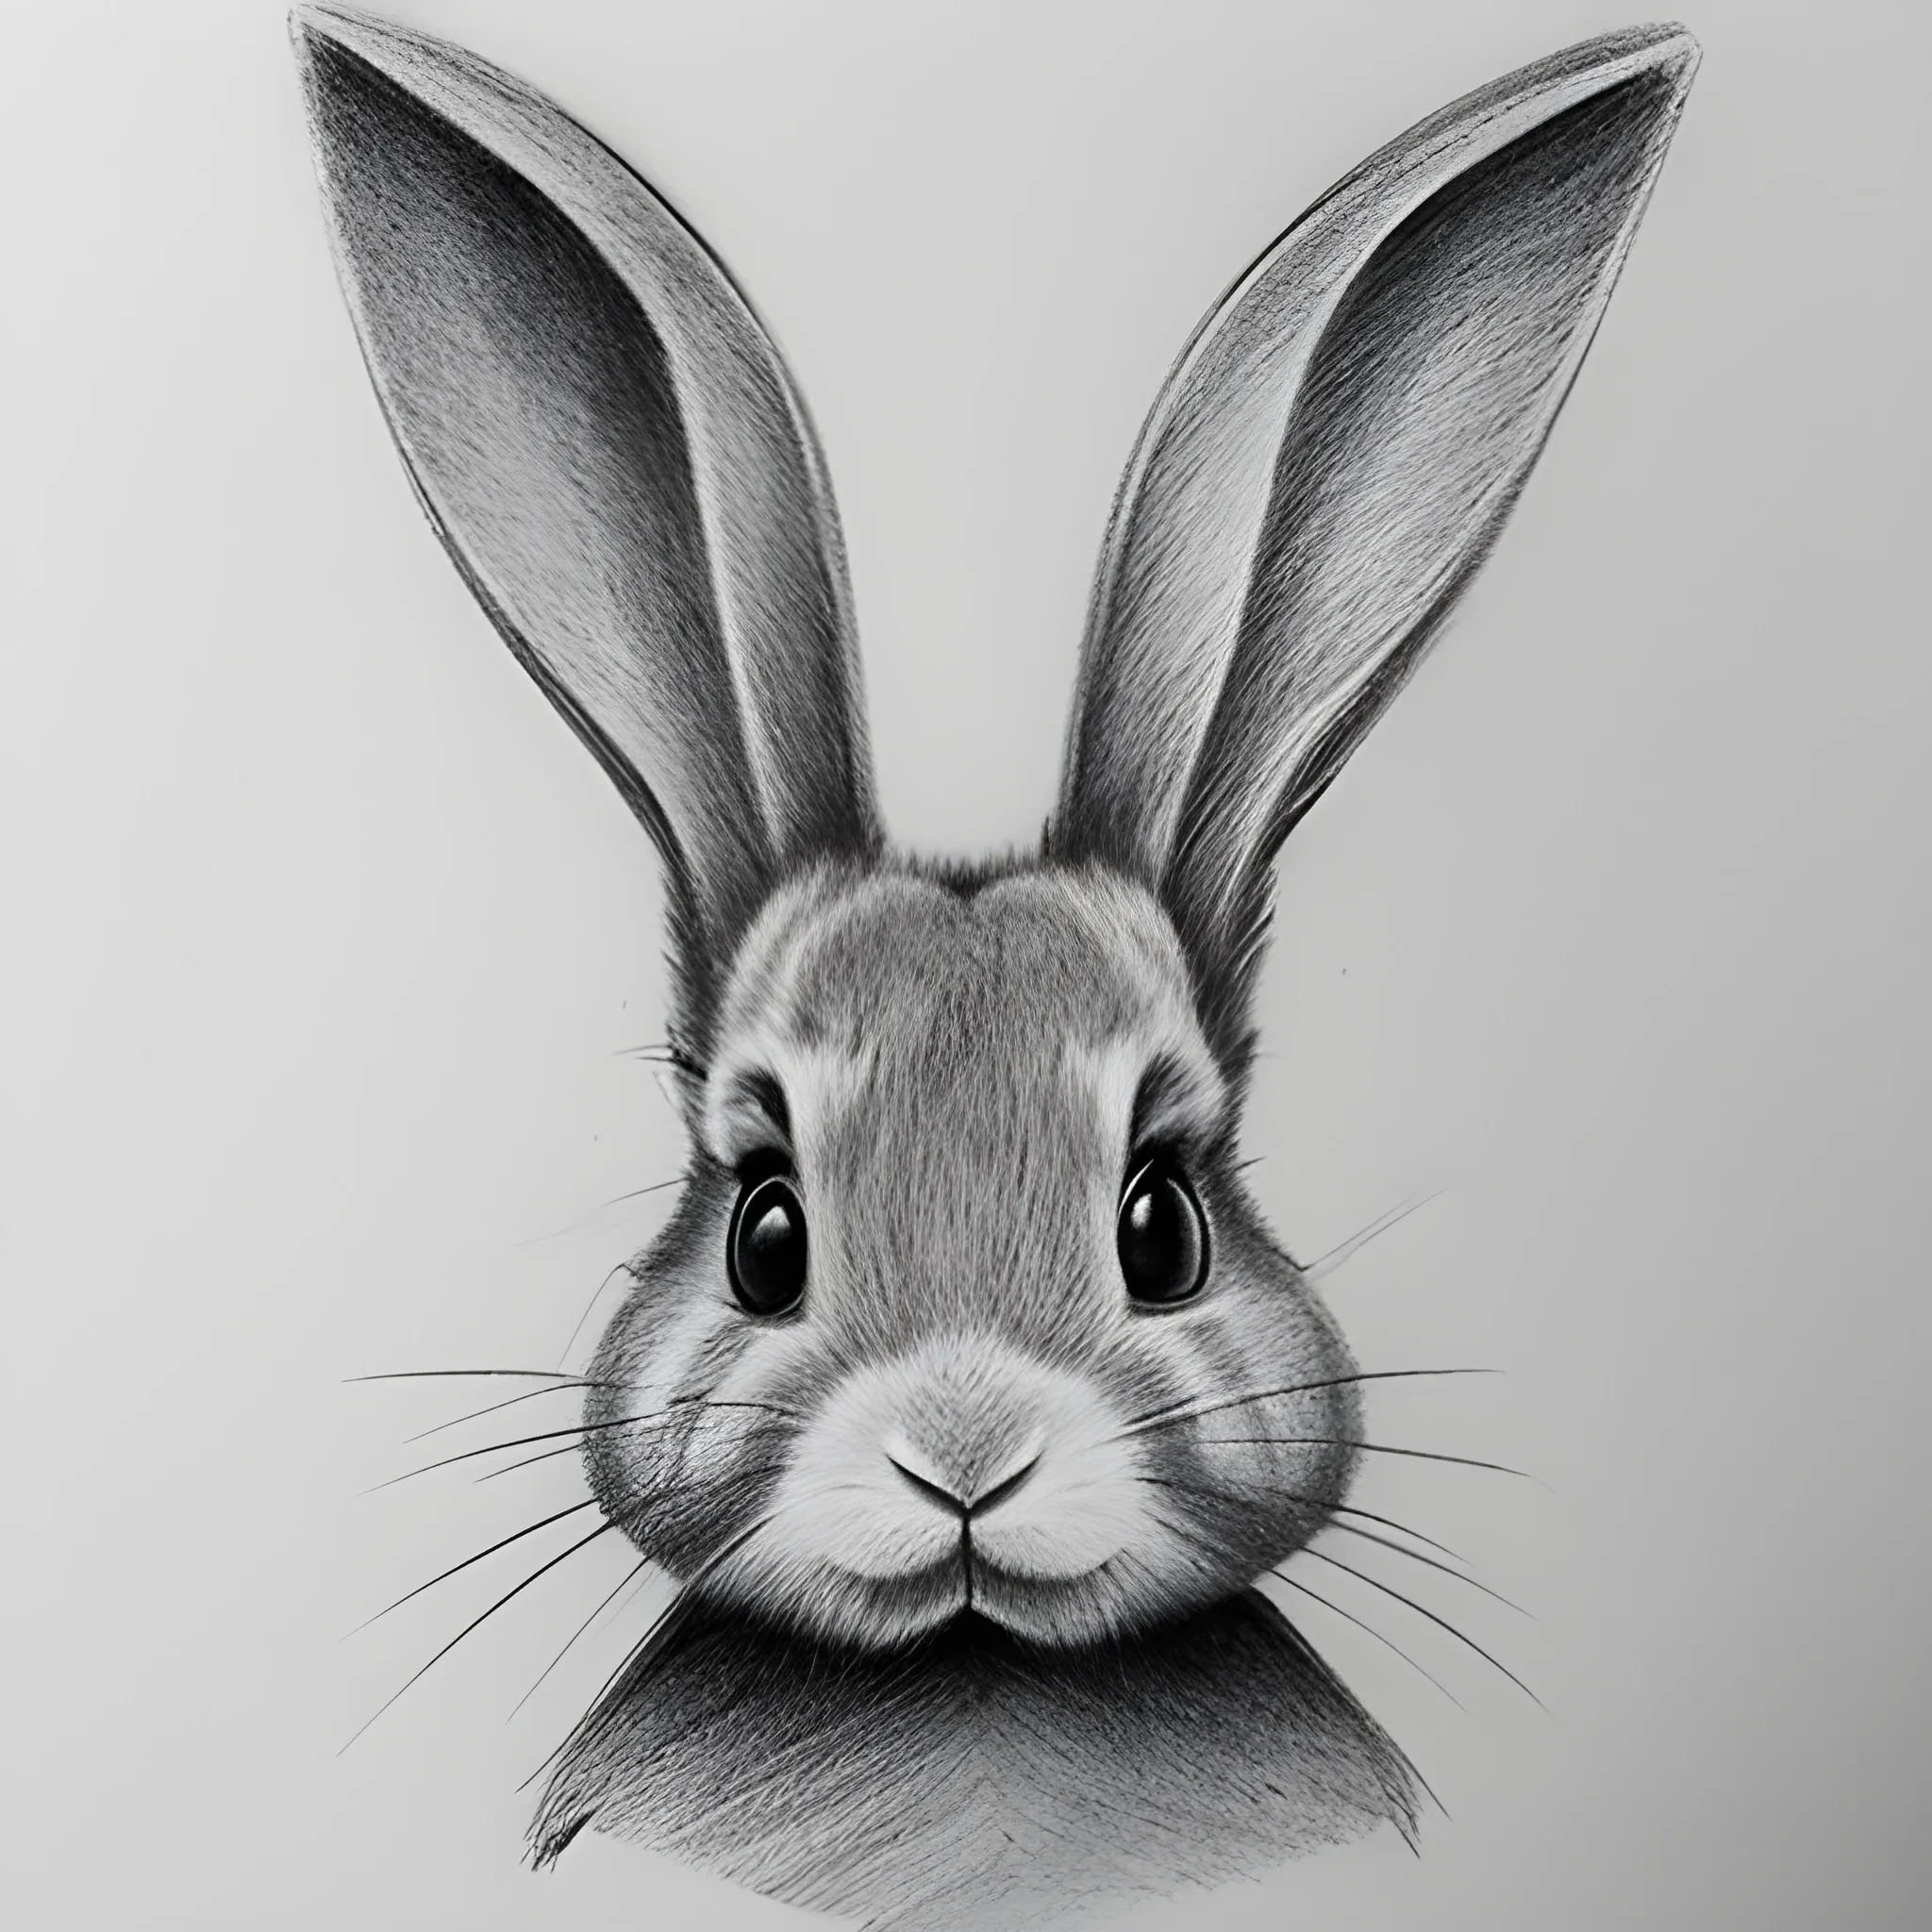 Rabbit pencil drawing by AnArtEnthusiast on DeviantArt